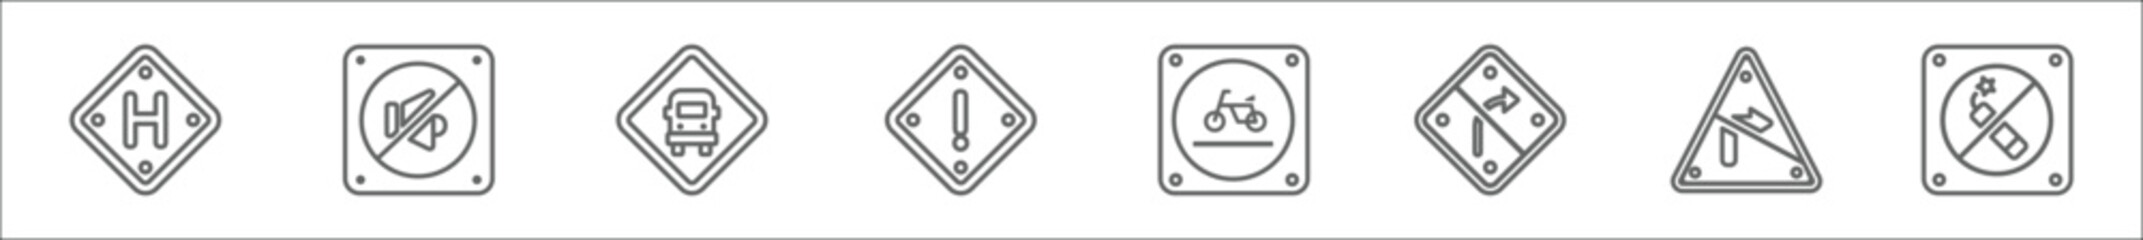 outline set of traffic signs line icons. linear vector icons such as hospital, no sound, bus stop, danger, cycle lane, no turn right, no turn, fireworks